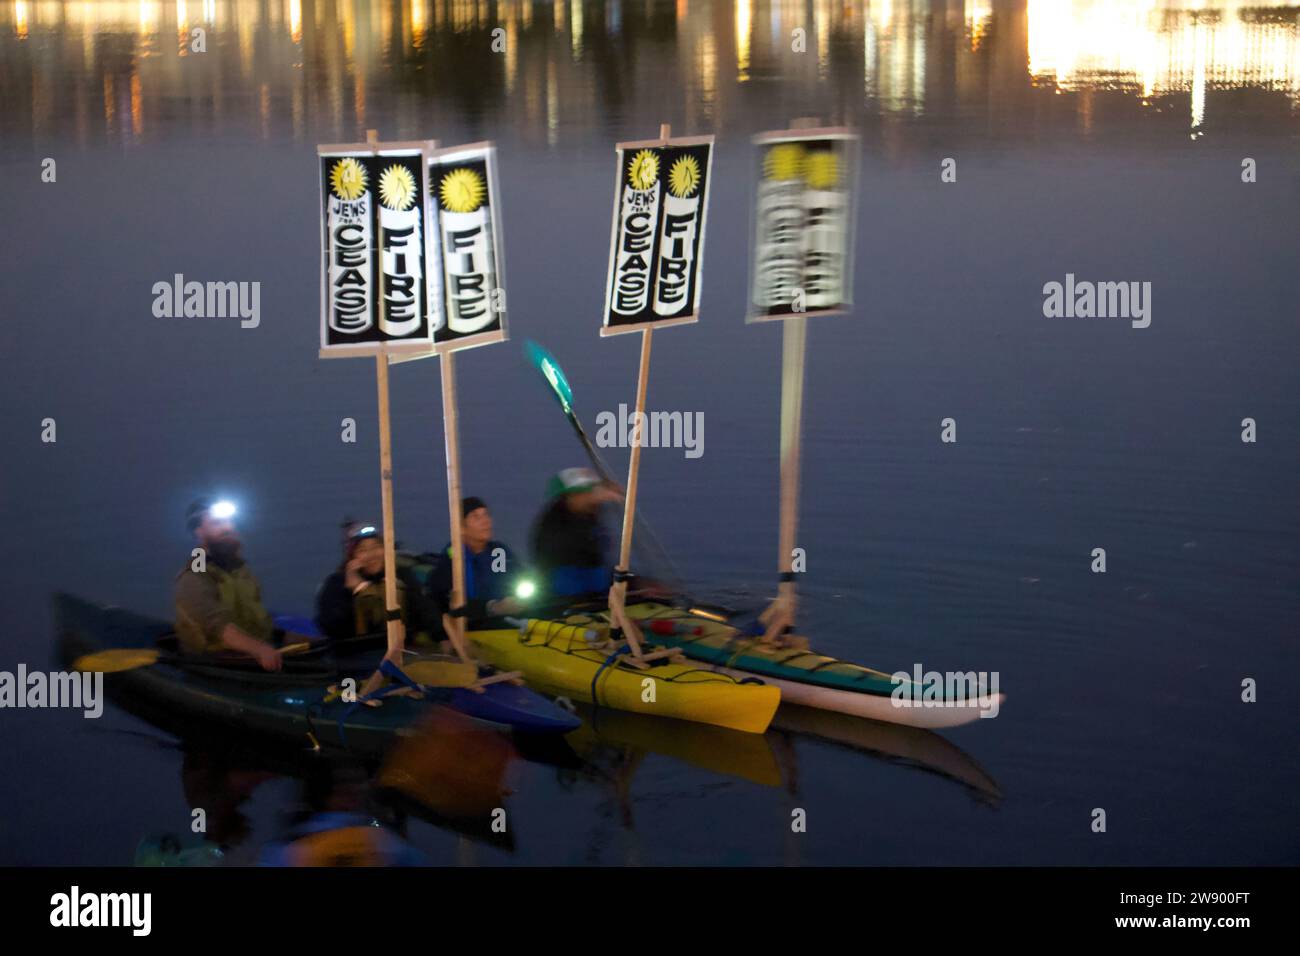 Oakland, California, USA. 22 Dec 2023. Bay Area Jews for Ceasefire Rally and Shabbat. Members of Jewish Voices for Peace gather for prayer to support Palestine and protest against bombing in Gaza and the killing of Gazans. Protesters in kayaks hold cease fire signs on Lake Merrit. Credit: Kristin Cato/Alamy Lives News Stock Photo